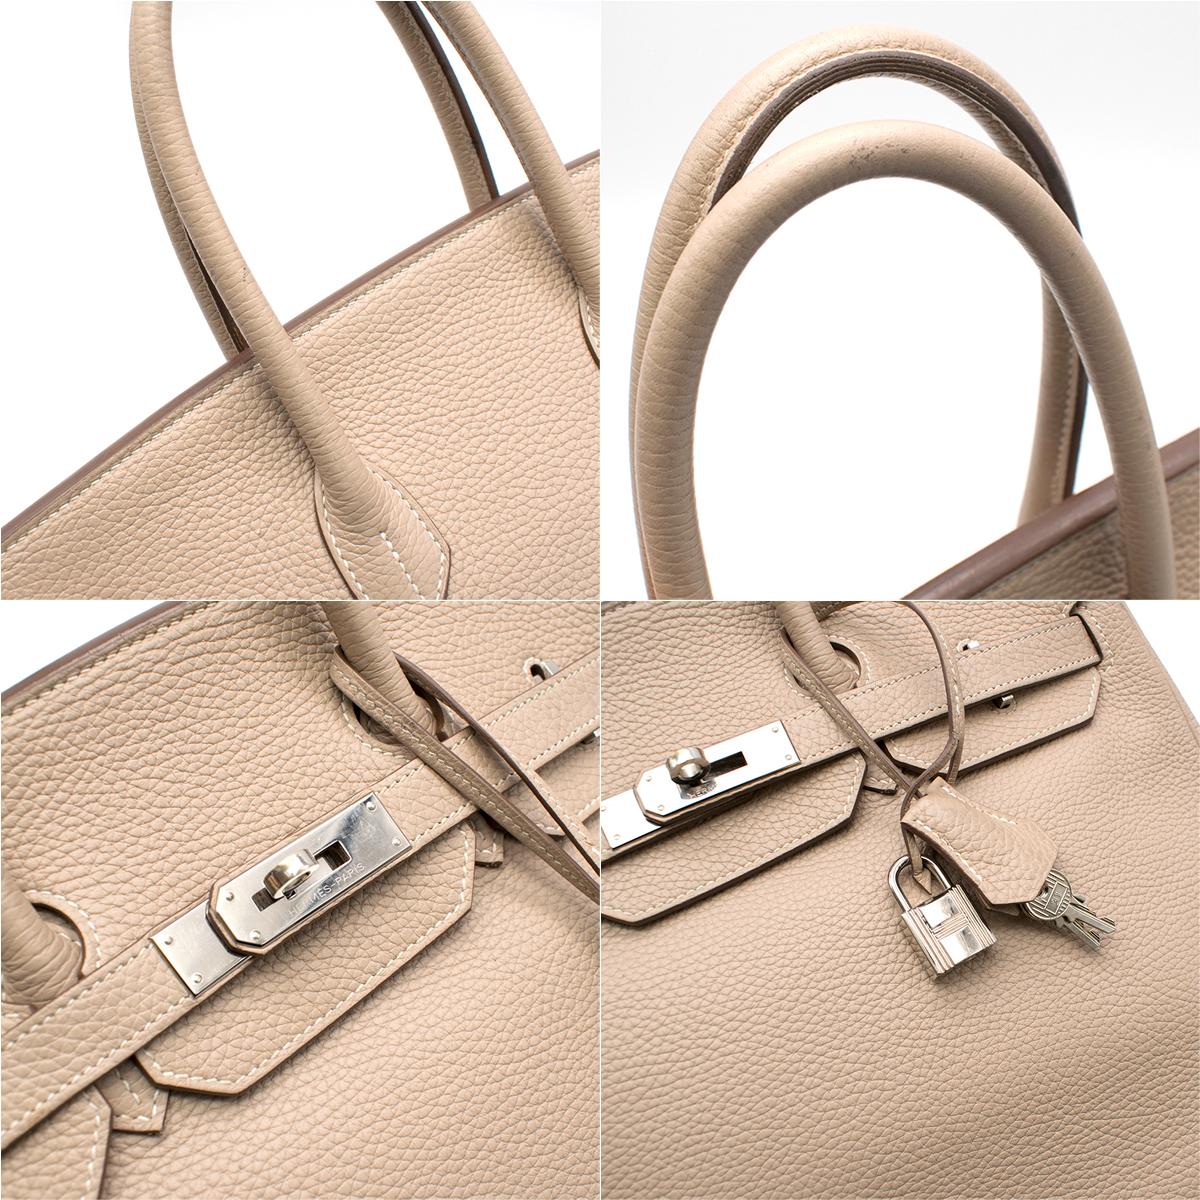 Hermes Argile Taurillion Clemence Leather 35cm Birkin	 In Good Condition For Sale In London, GB